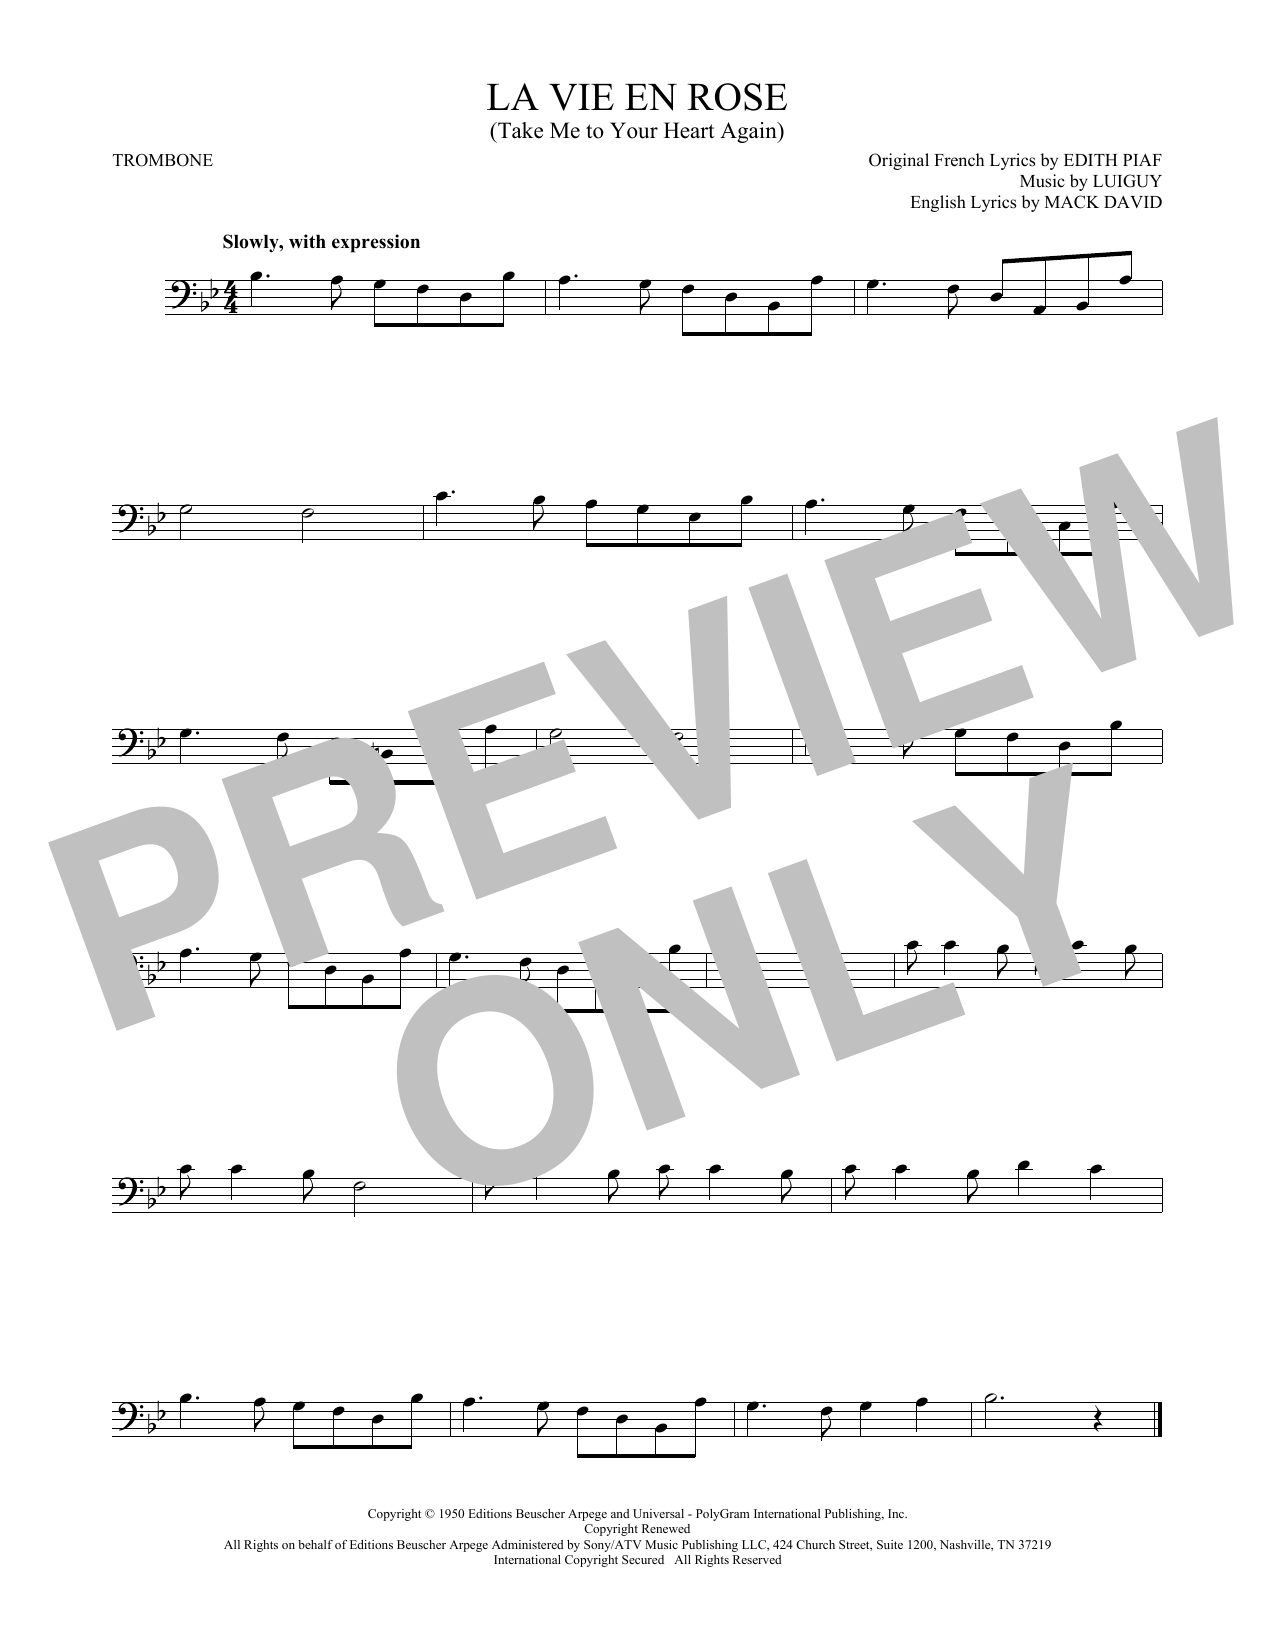 Edith Piaf La Vie En Rose (Take Me To Your Heart Again) sheet music notes and chords. Download Printable PDF.